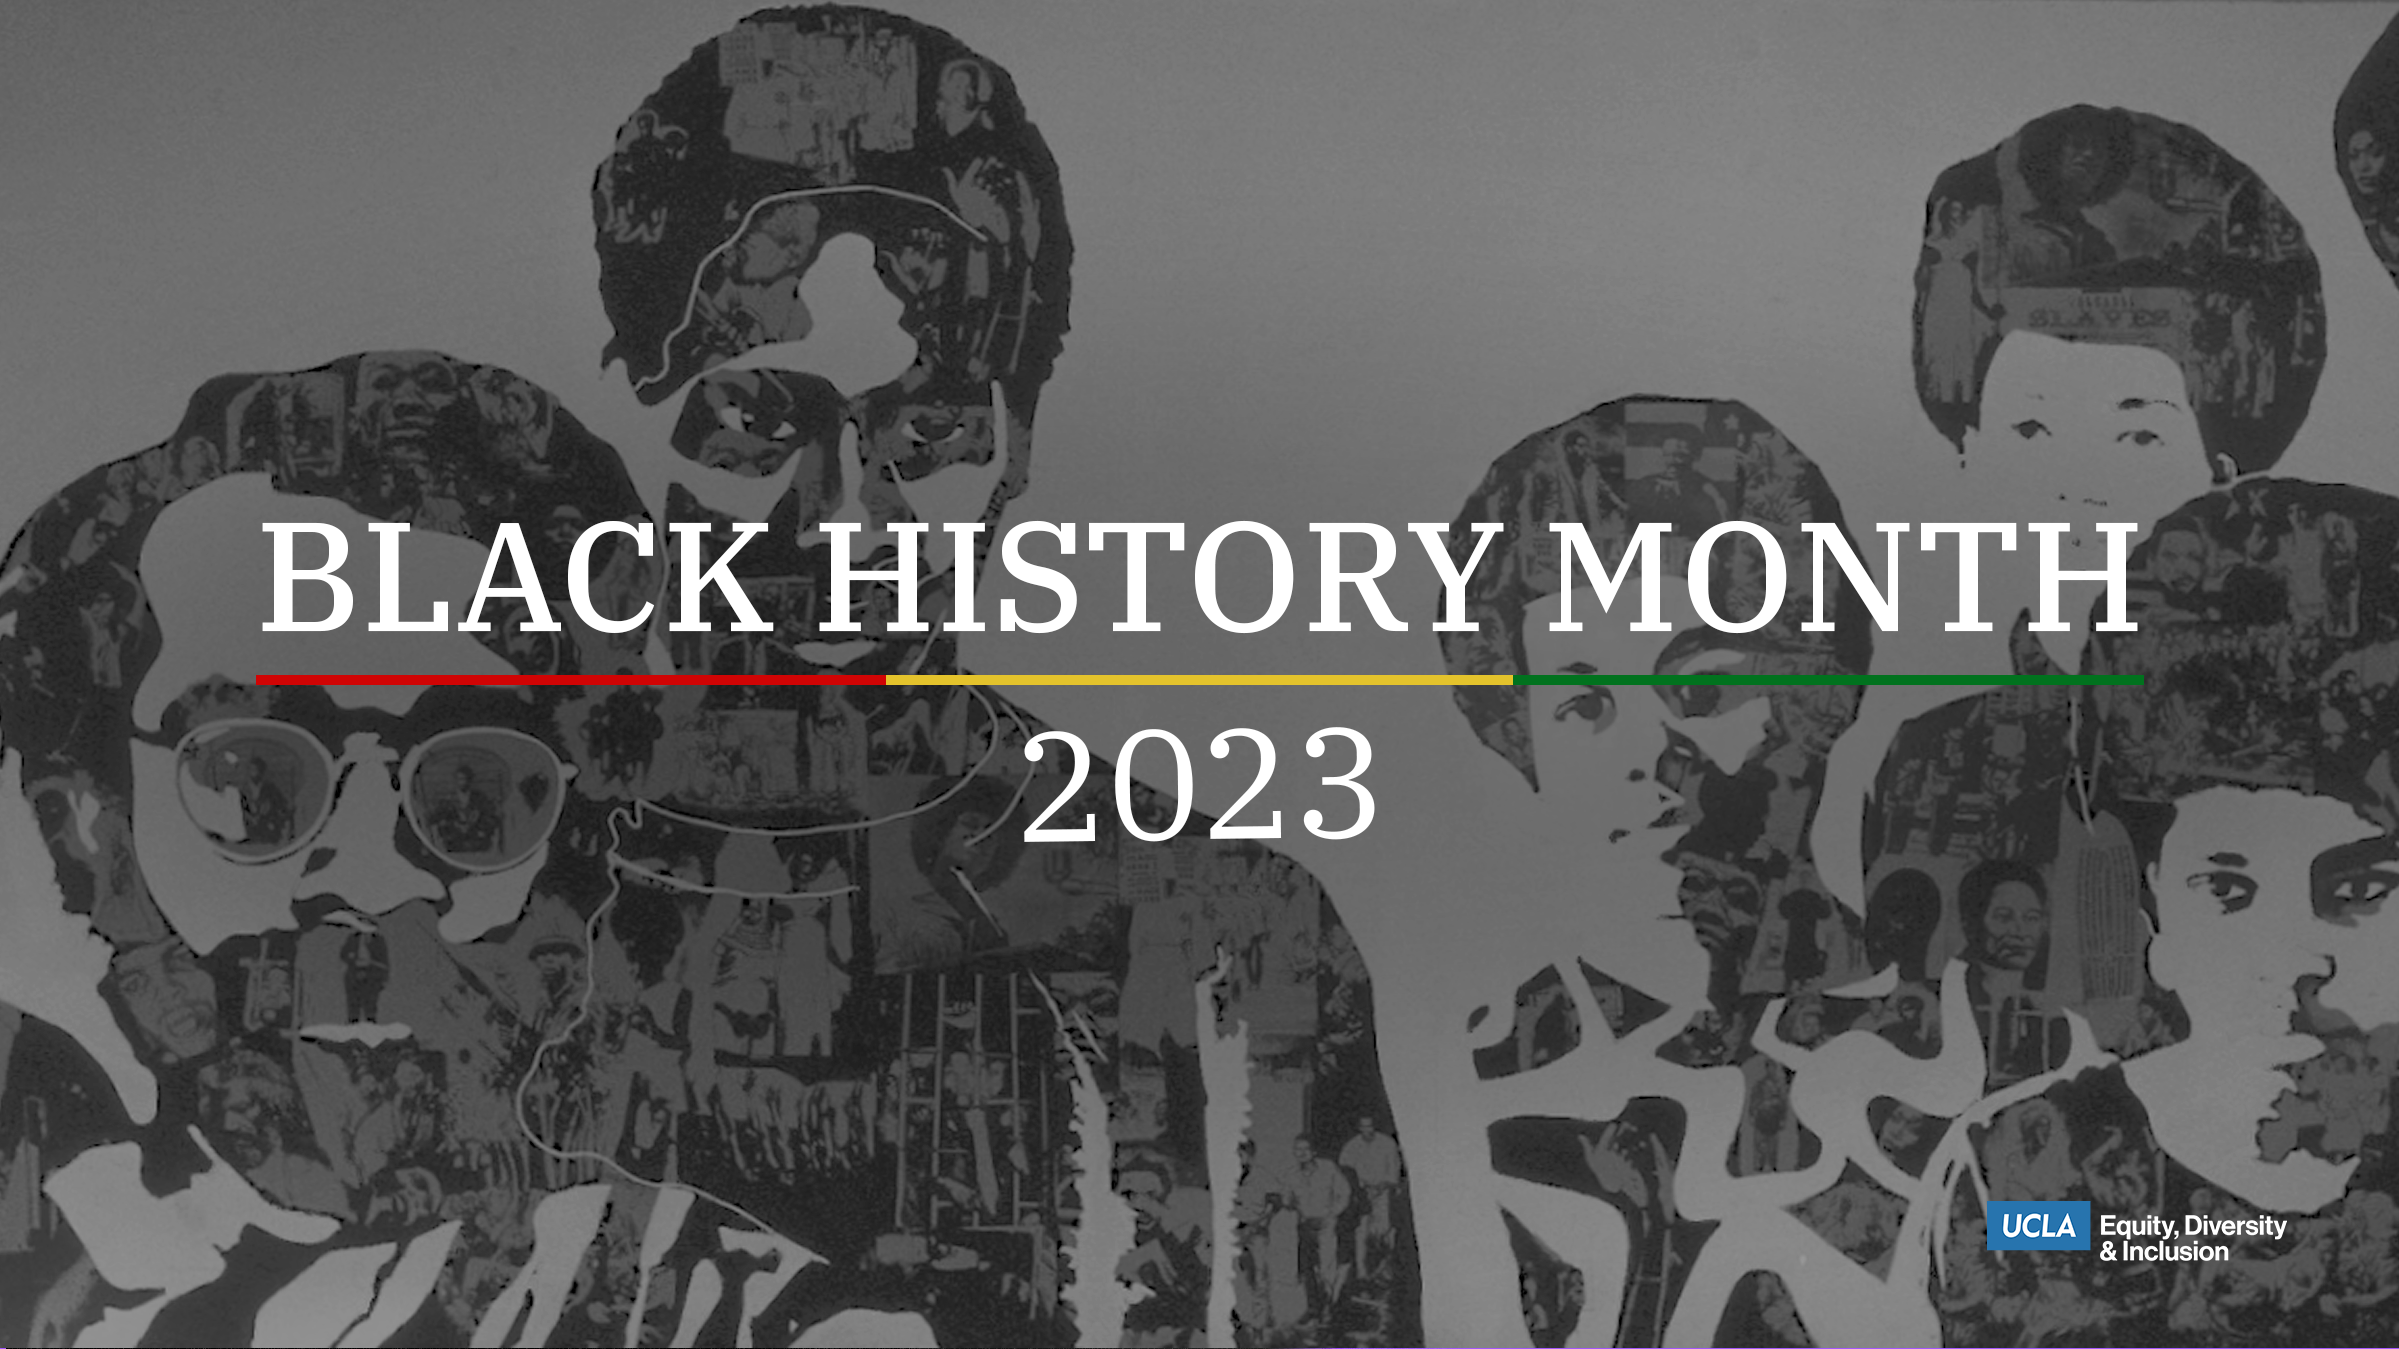 black history month 2023 - mural painting in the background